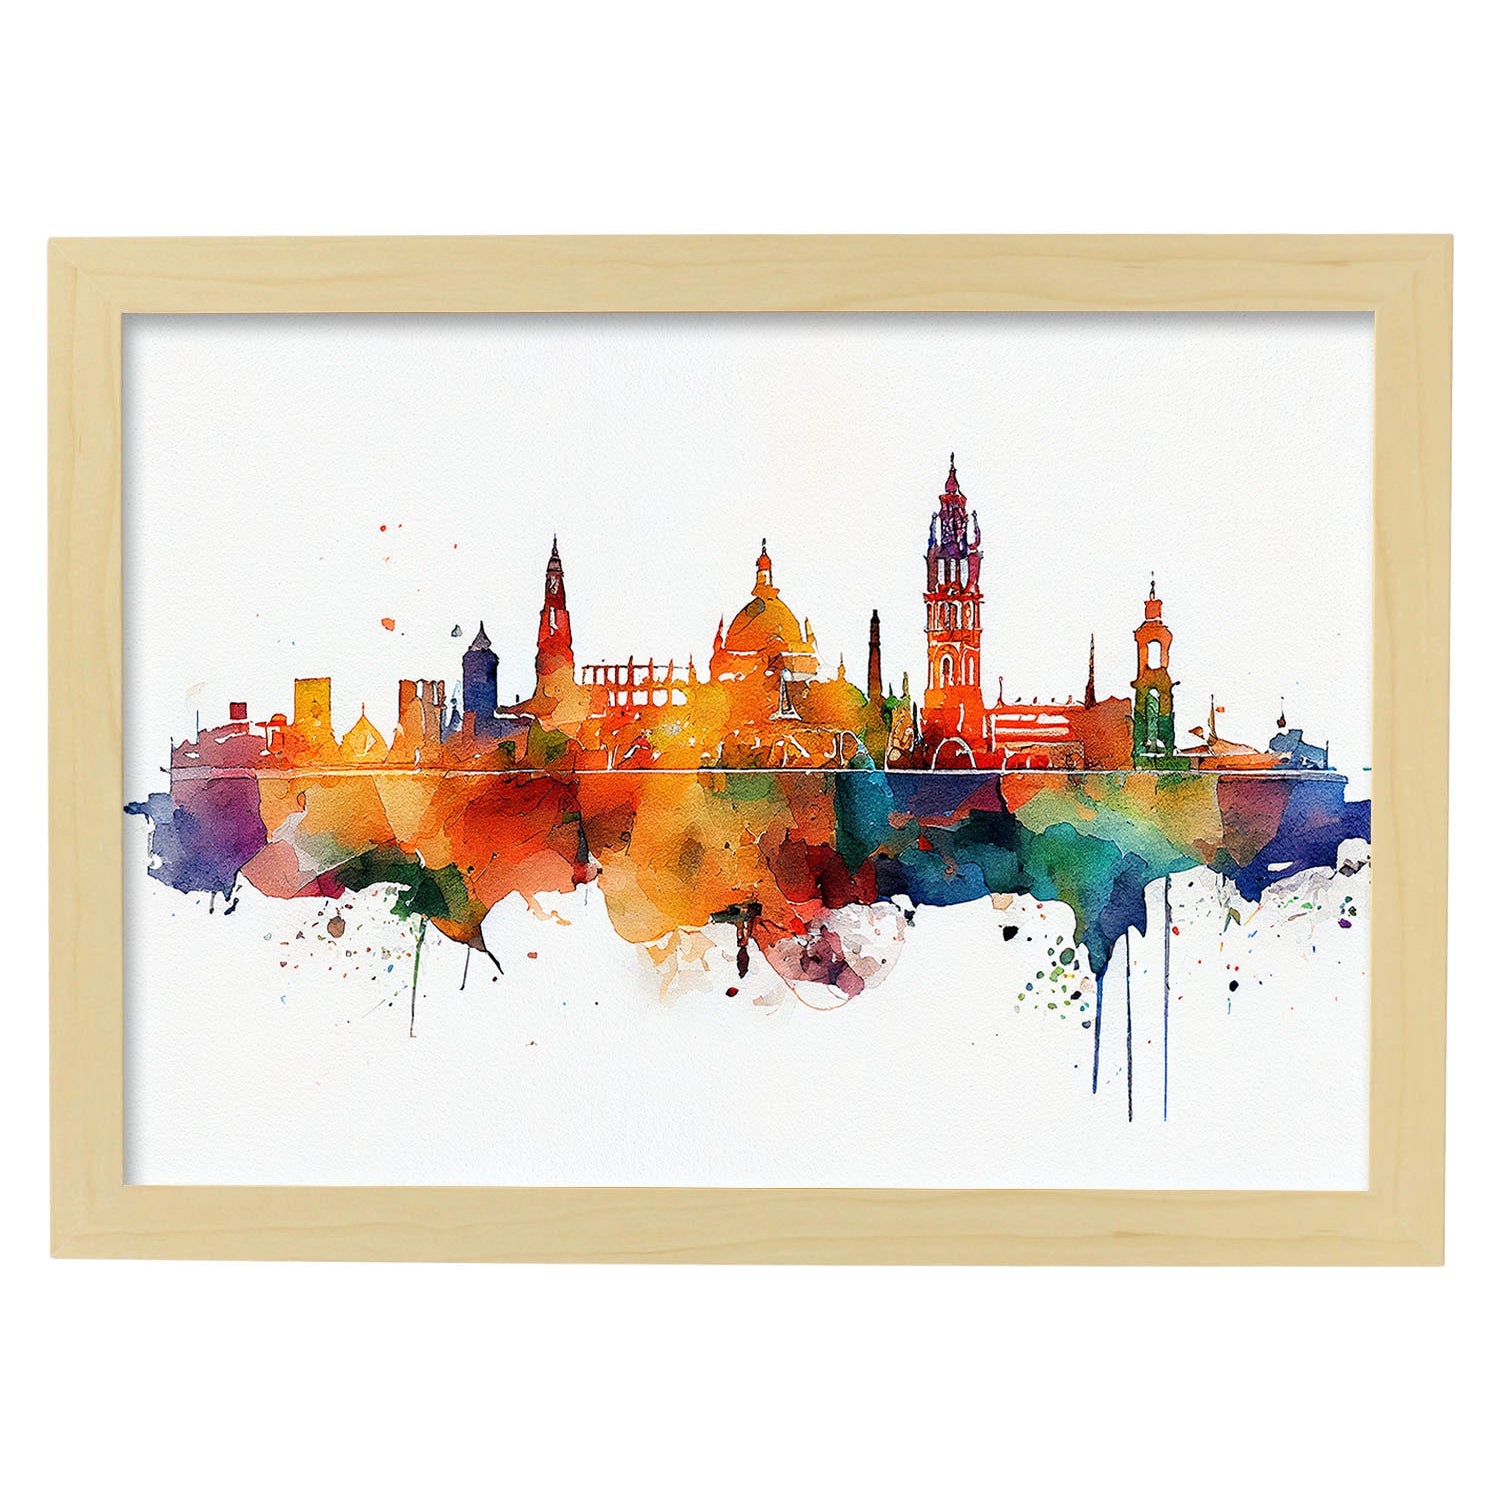 Nacnic watercolor of a skyline of the city of Seville. Aesthetic Wall Art Prints for Bedroom or Living Room Design.-Artwork-Nacnic-A4-Marco Madera Clara-Nacnic Estudio SL